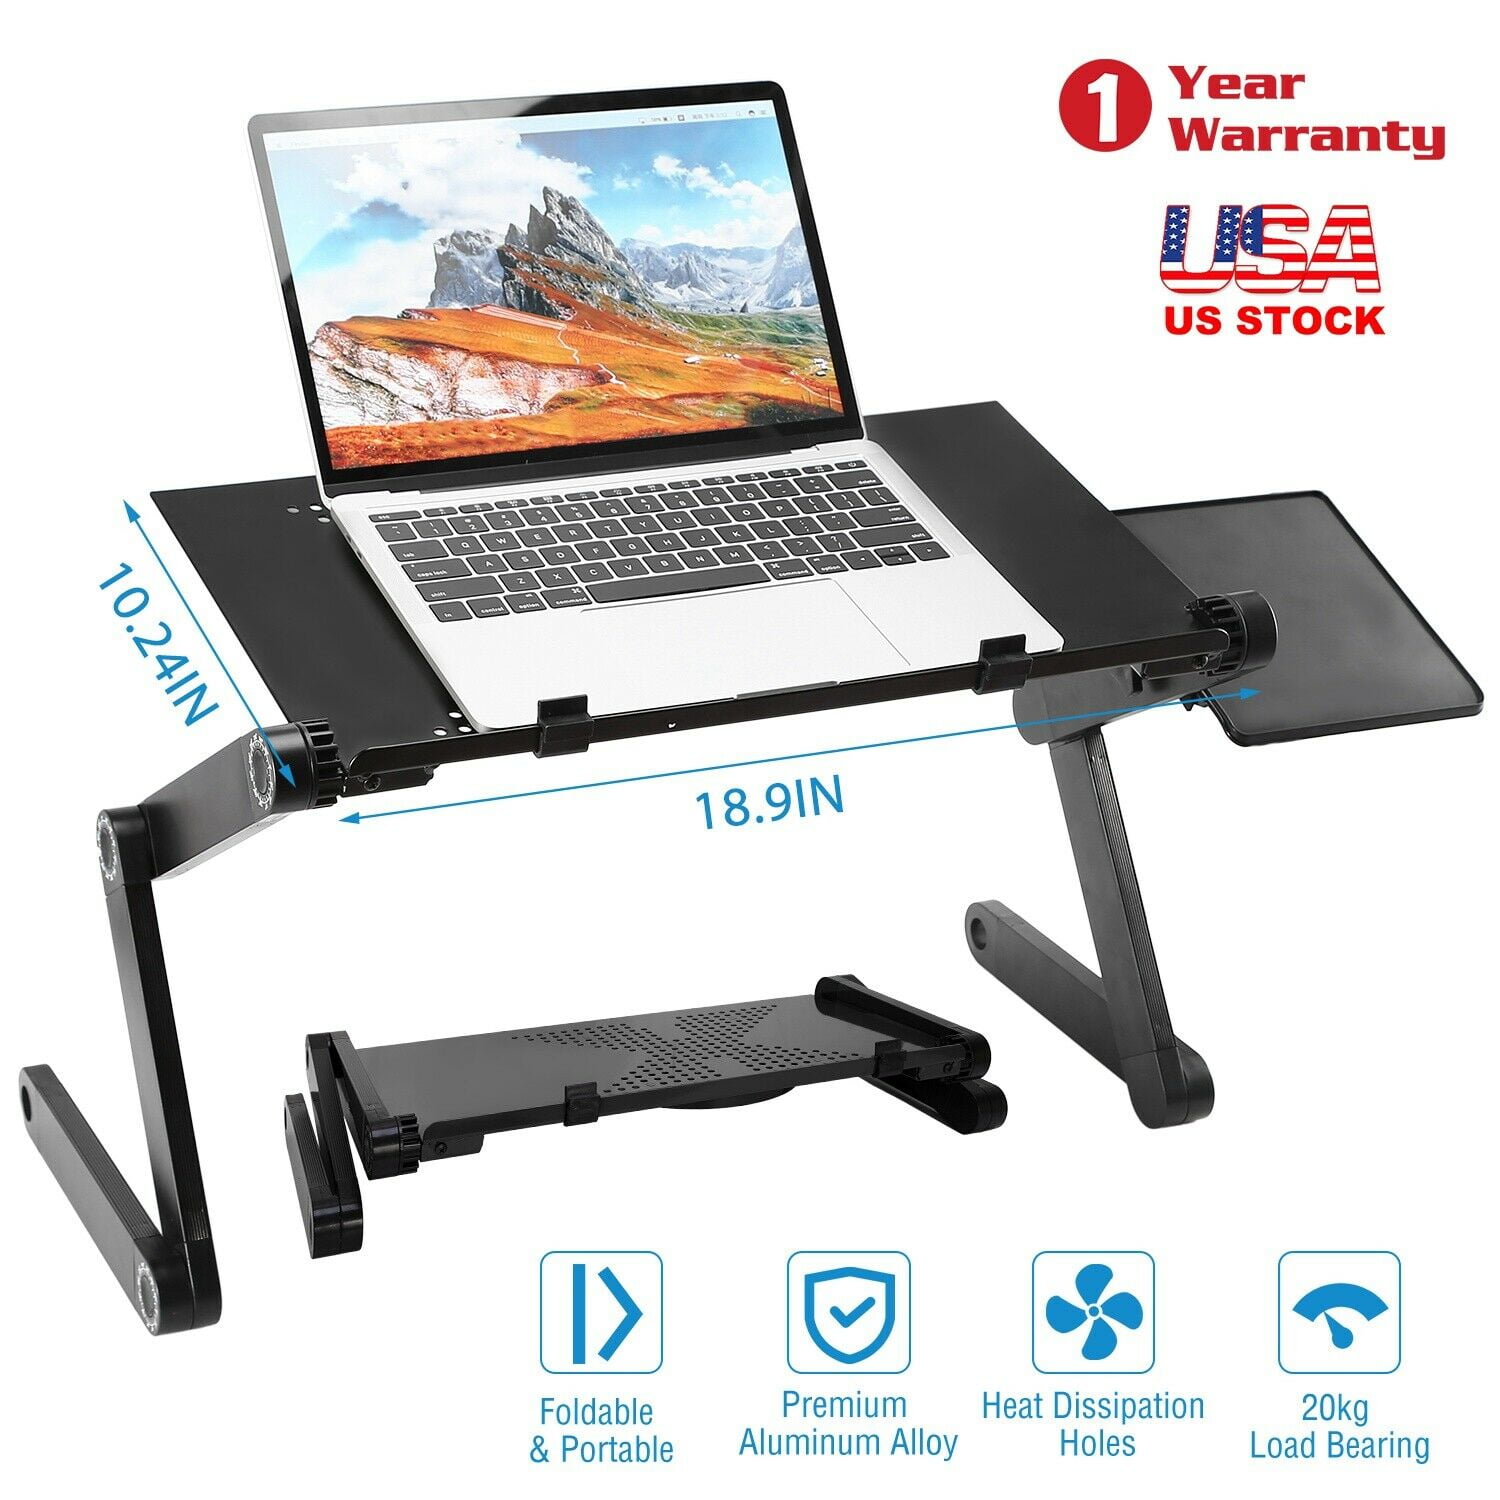 Portable Lap Stand Riser Adjustable Laptop Stand for Desk/Bed/Sofa ” Lightweight Workstation Computer Riser for Home Office, Aluminum Tray Table with Heat- Vent White 18.9 x 10.24 